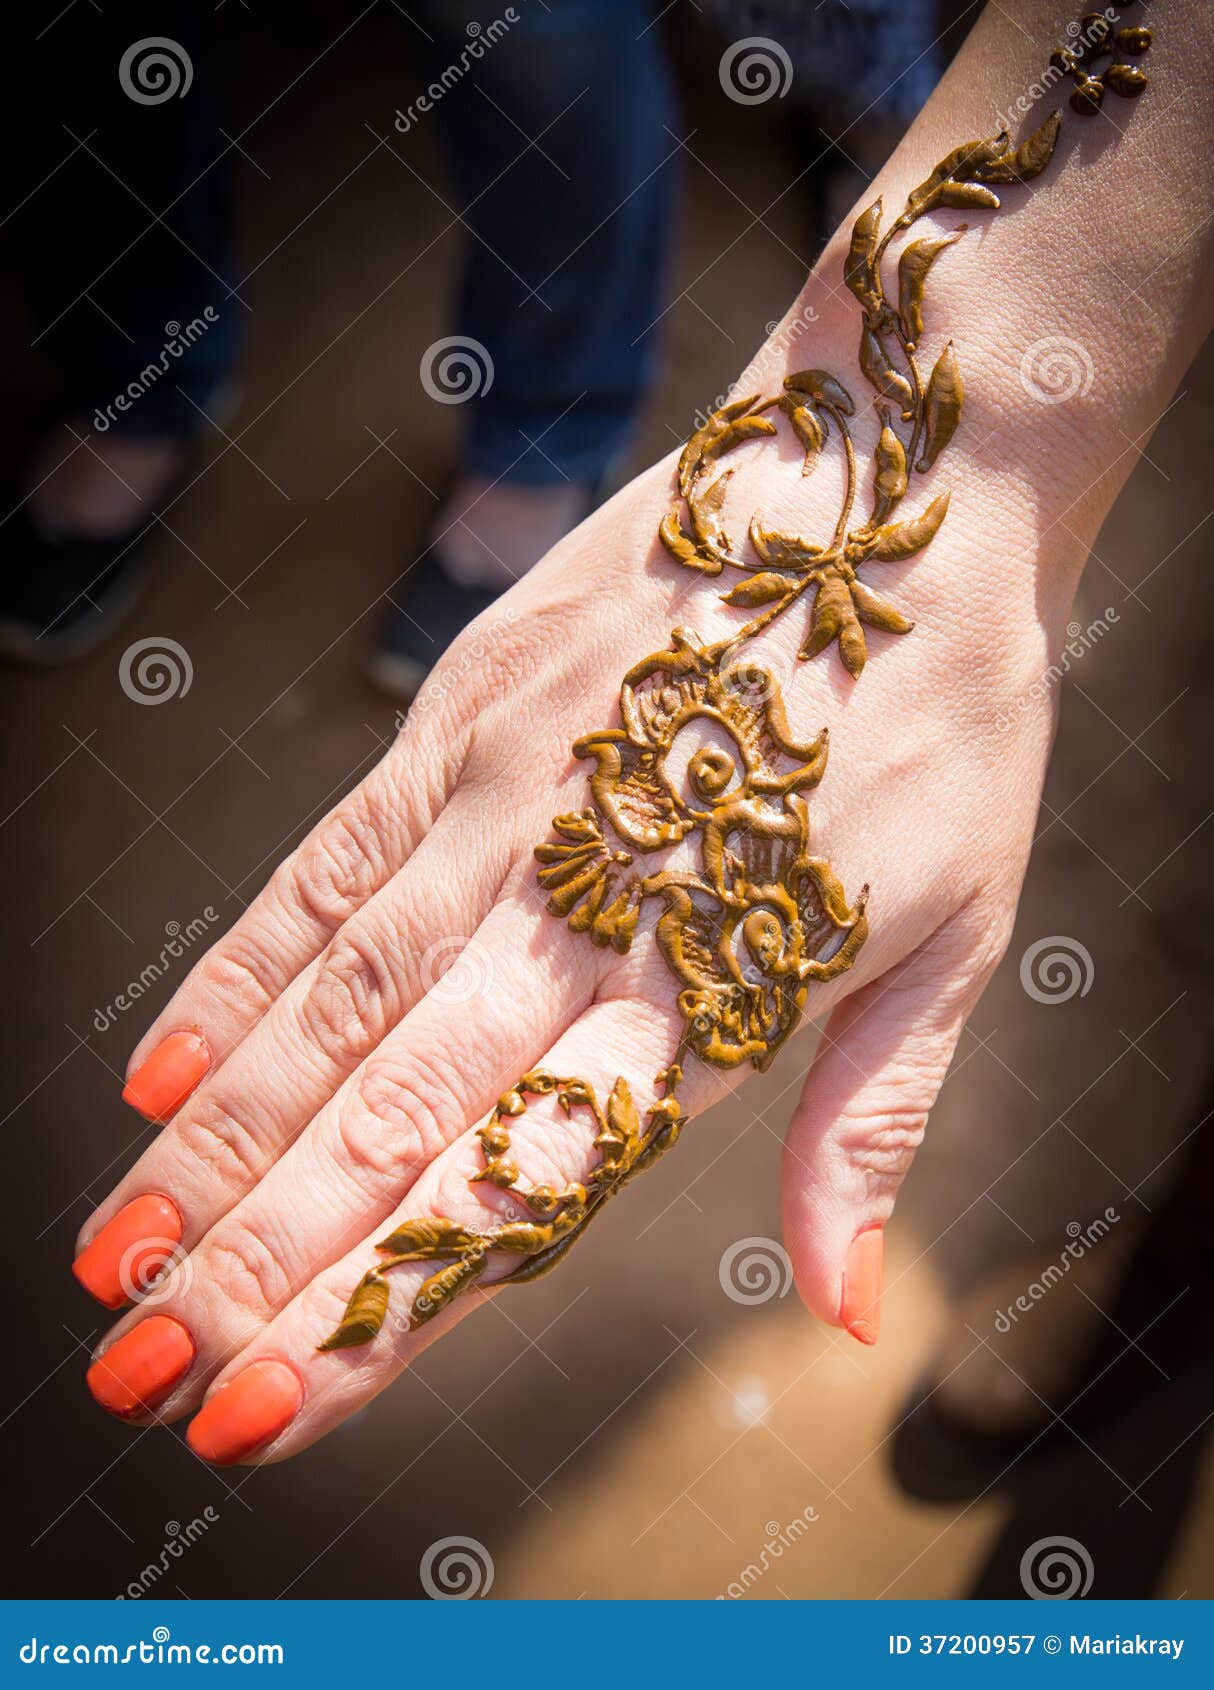 Henna on a Skin for a Temporary Tattoo Stock Image - Image of hand ...